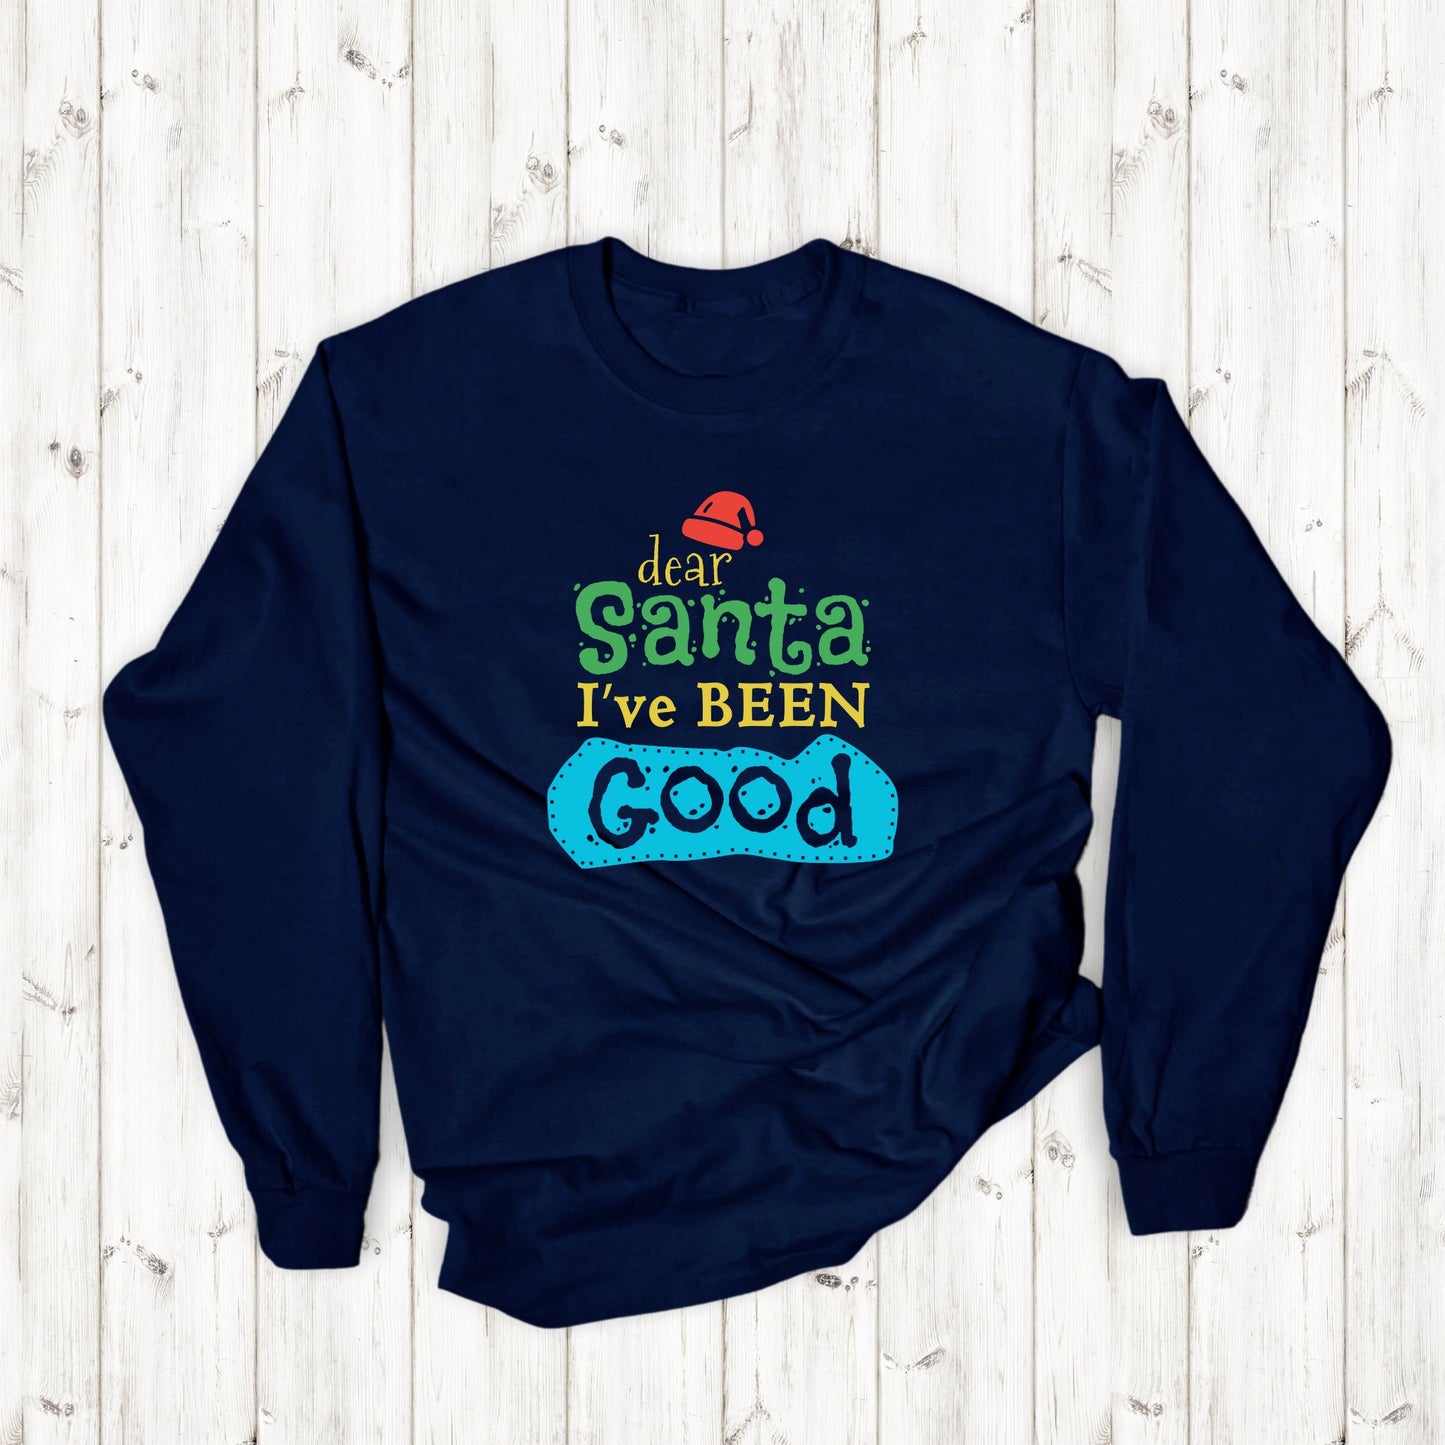 Christmas Long Sleeve T-Shirt - Dear Santa I've Been Good - Cute Christmas Shirts - Youth and Adult Christmas Long Sleeve TShirts Long Sleeve T-Shirts Graphic Avenue Navy Adult Small 